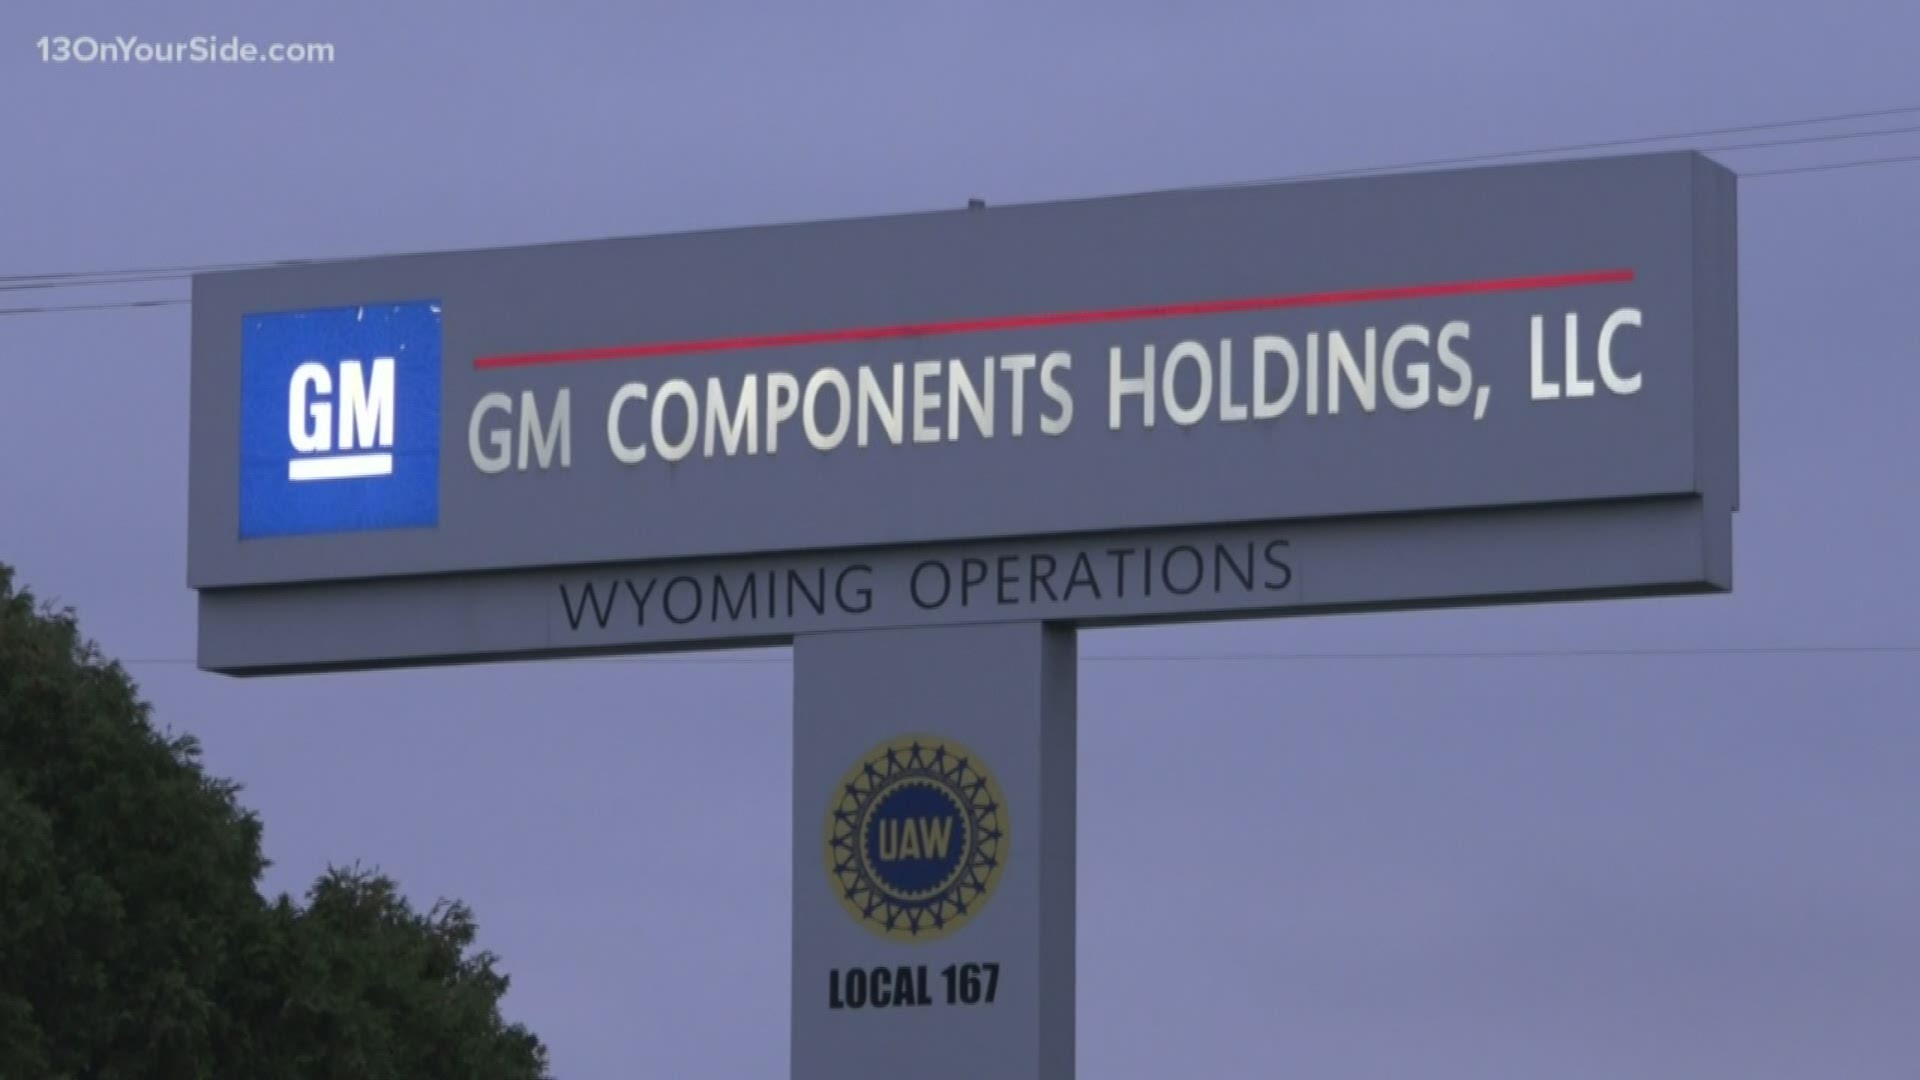 General Motors offered striking union members wage increases or lump-sum payments in all four years of a proposed contract, seeking an end to the 3-week strike.